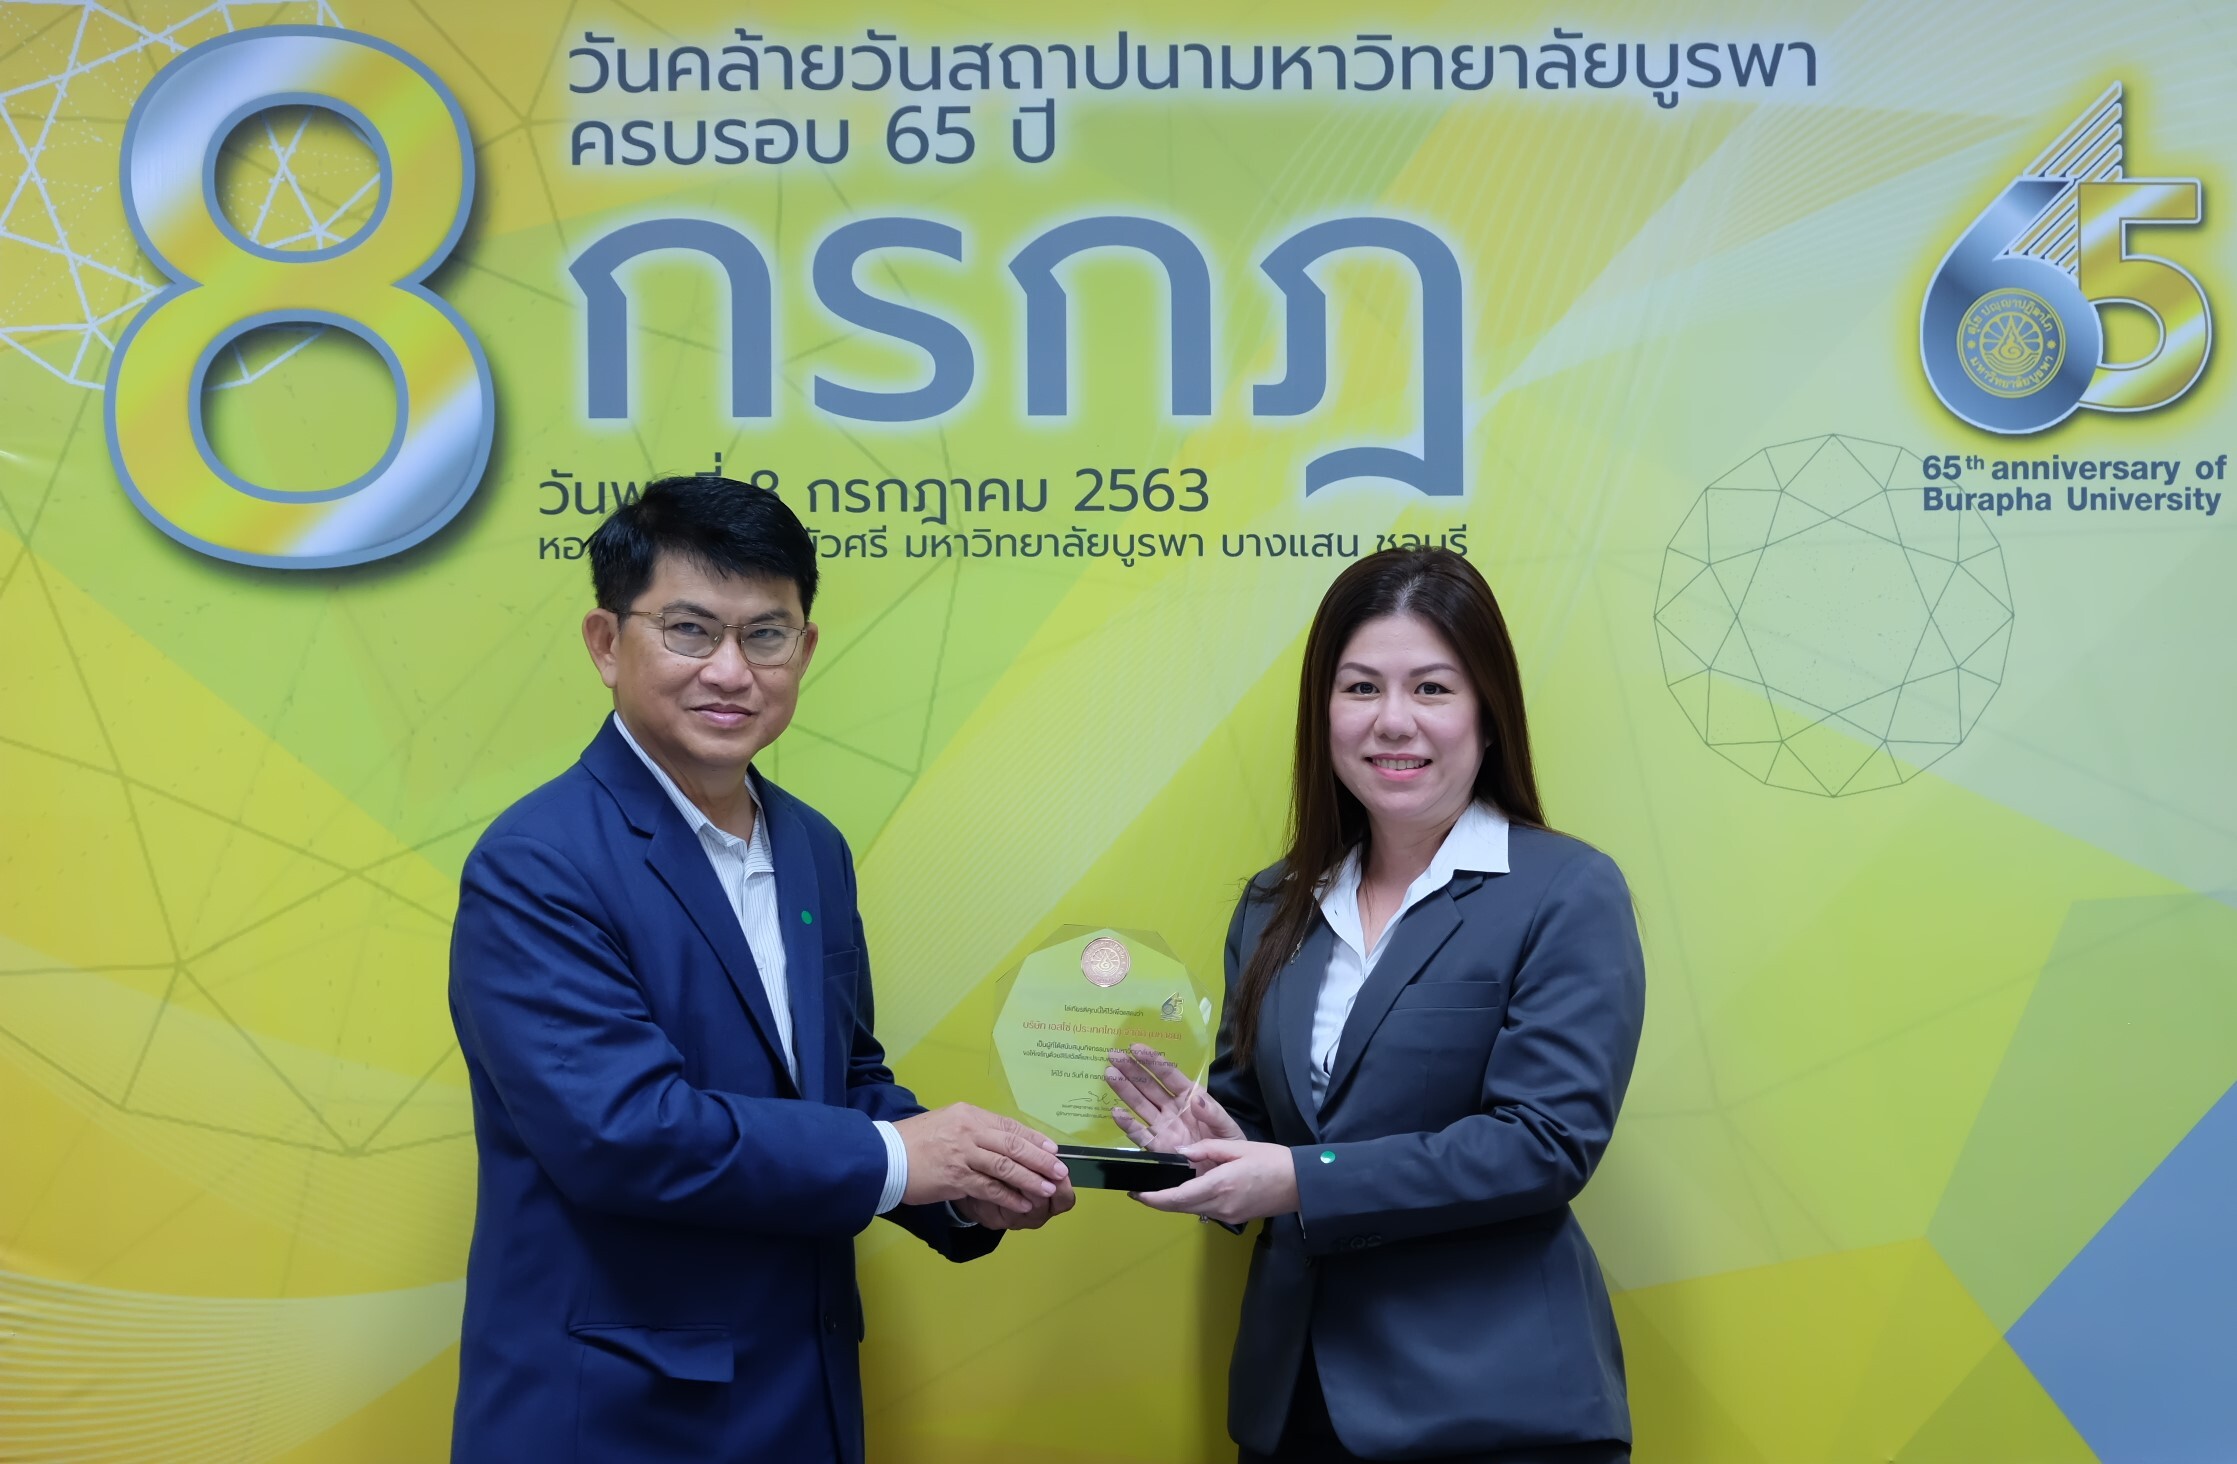 Esso and ExxonMobil in Thailand received Appreciation Plaque of Honor from Burapha University